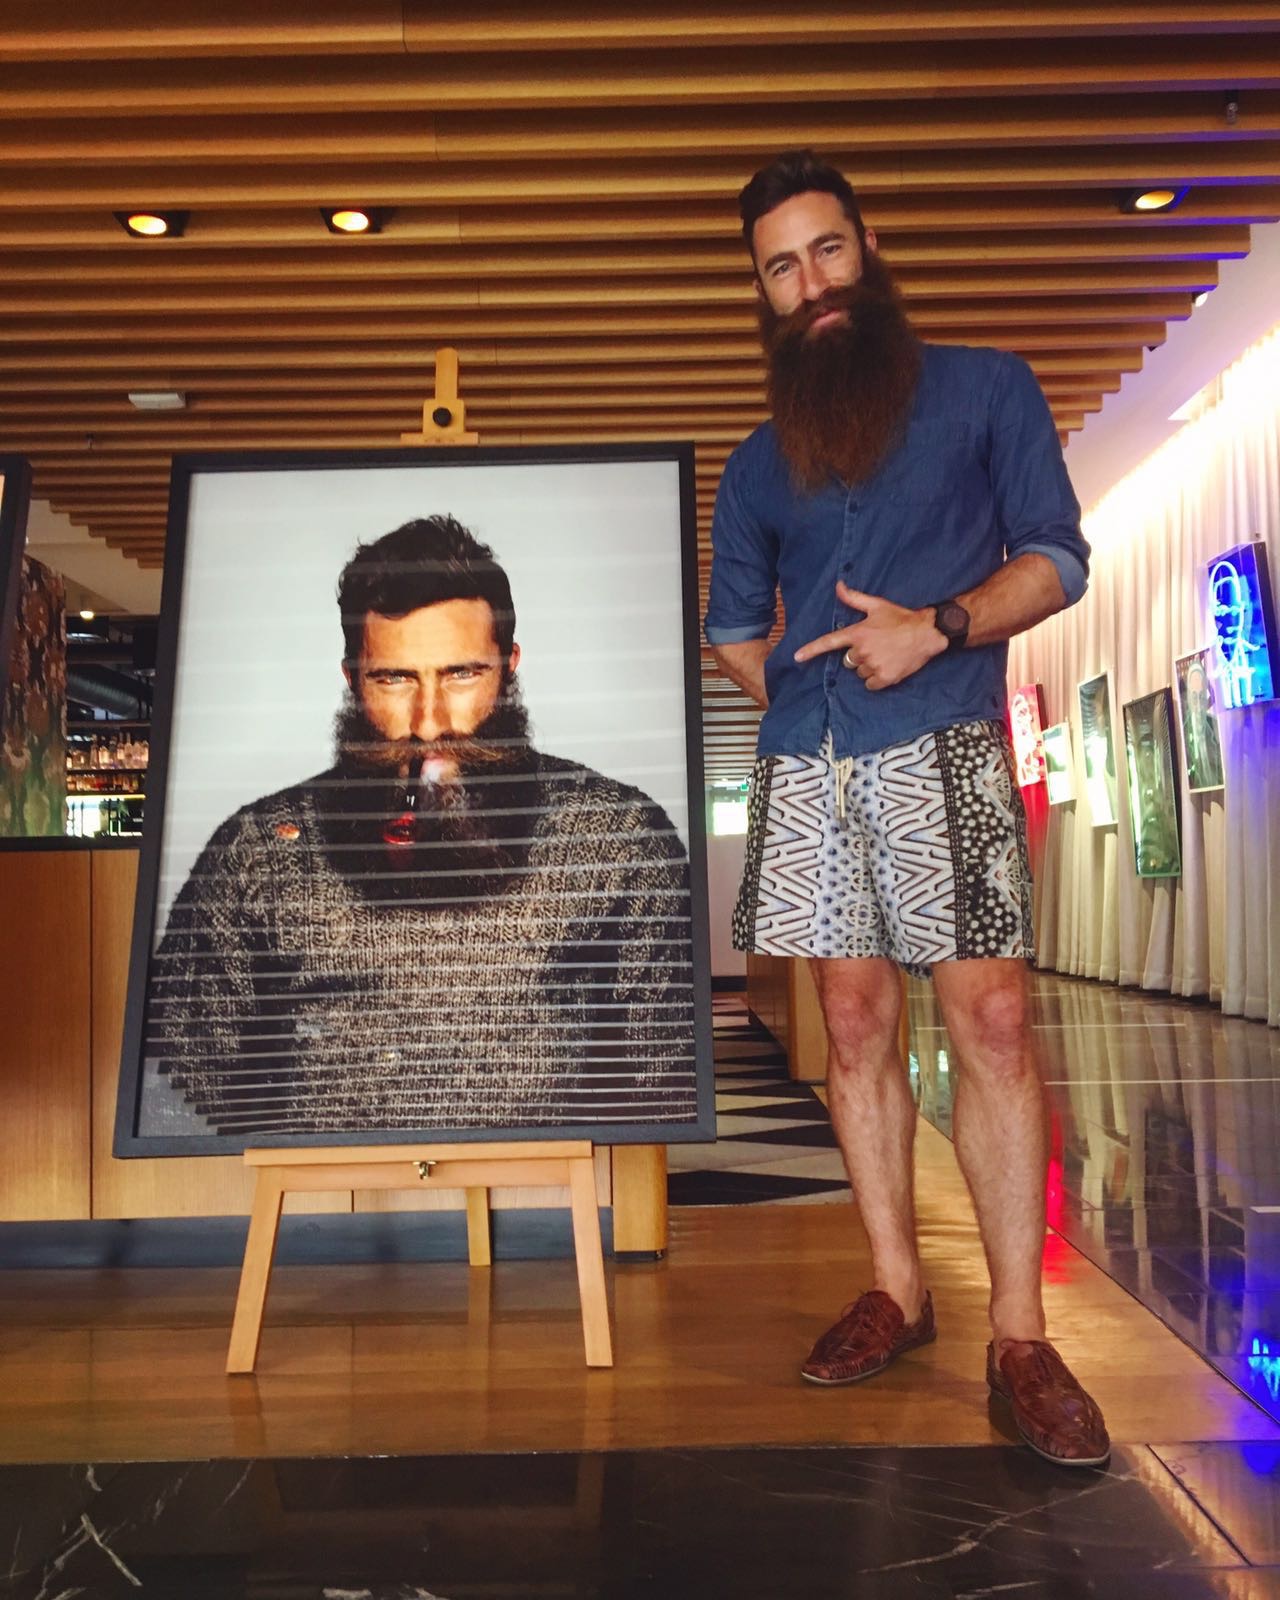 Photographic exhibition of beards at QT Canberra